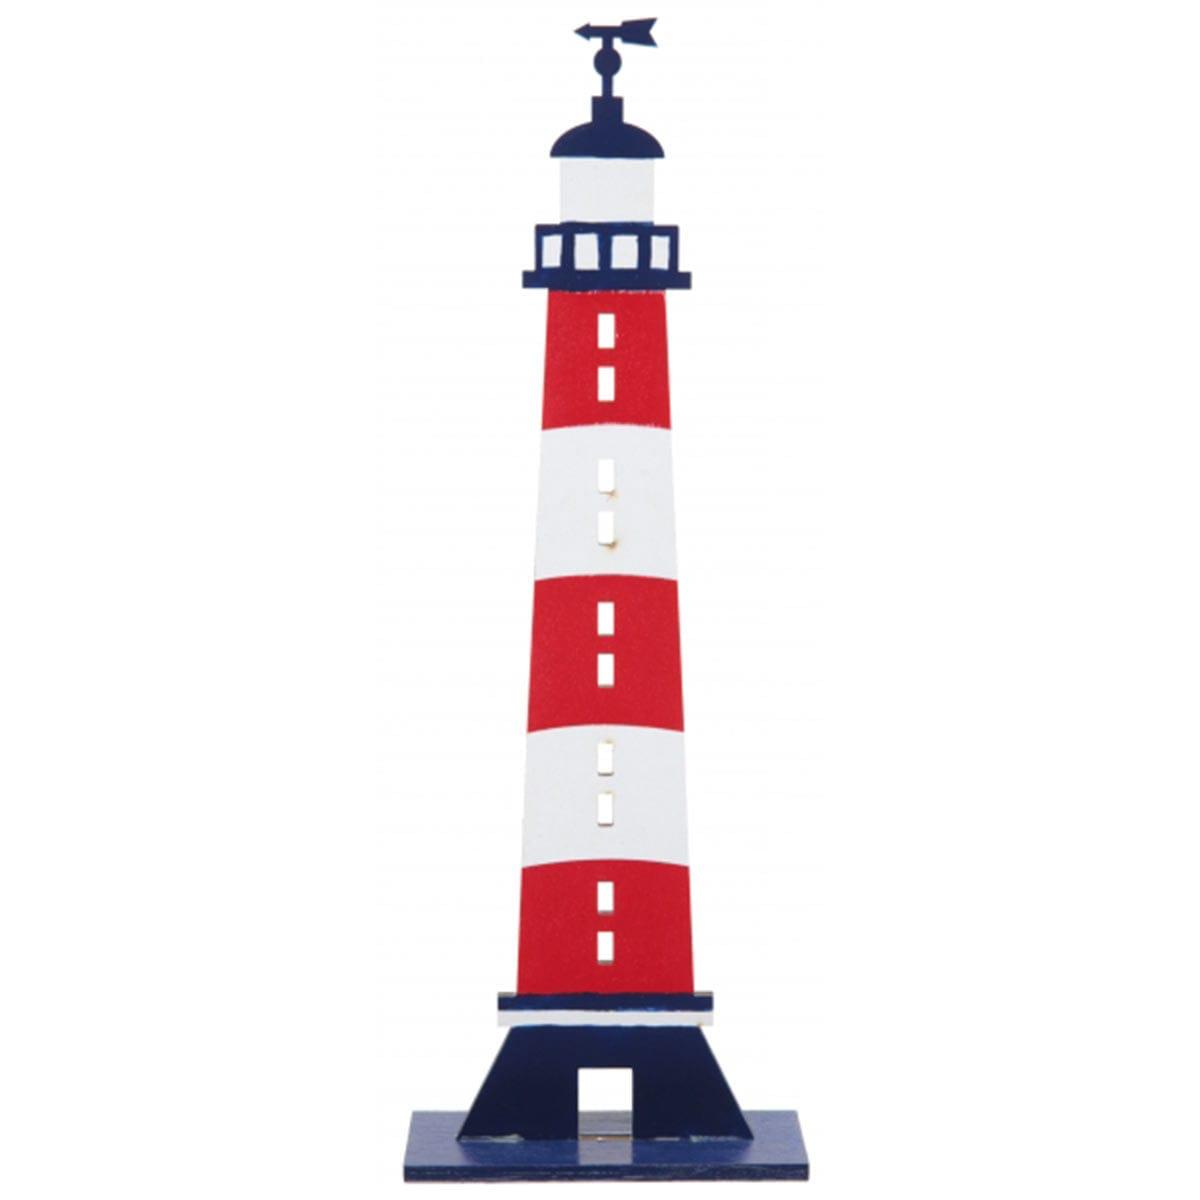 SANTEX Theme Party Seaside Lighthouse Centrepiece, Blue, Red and White